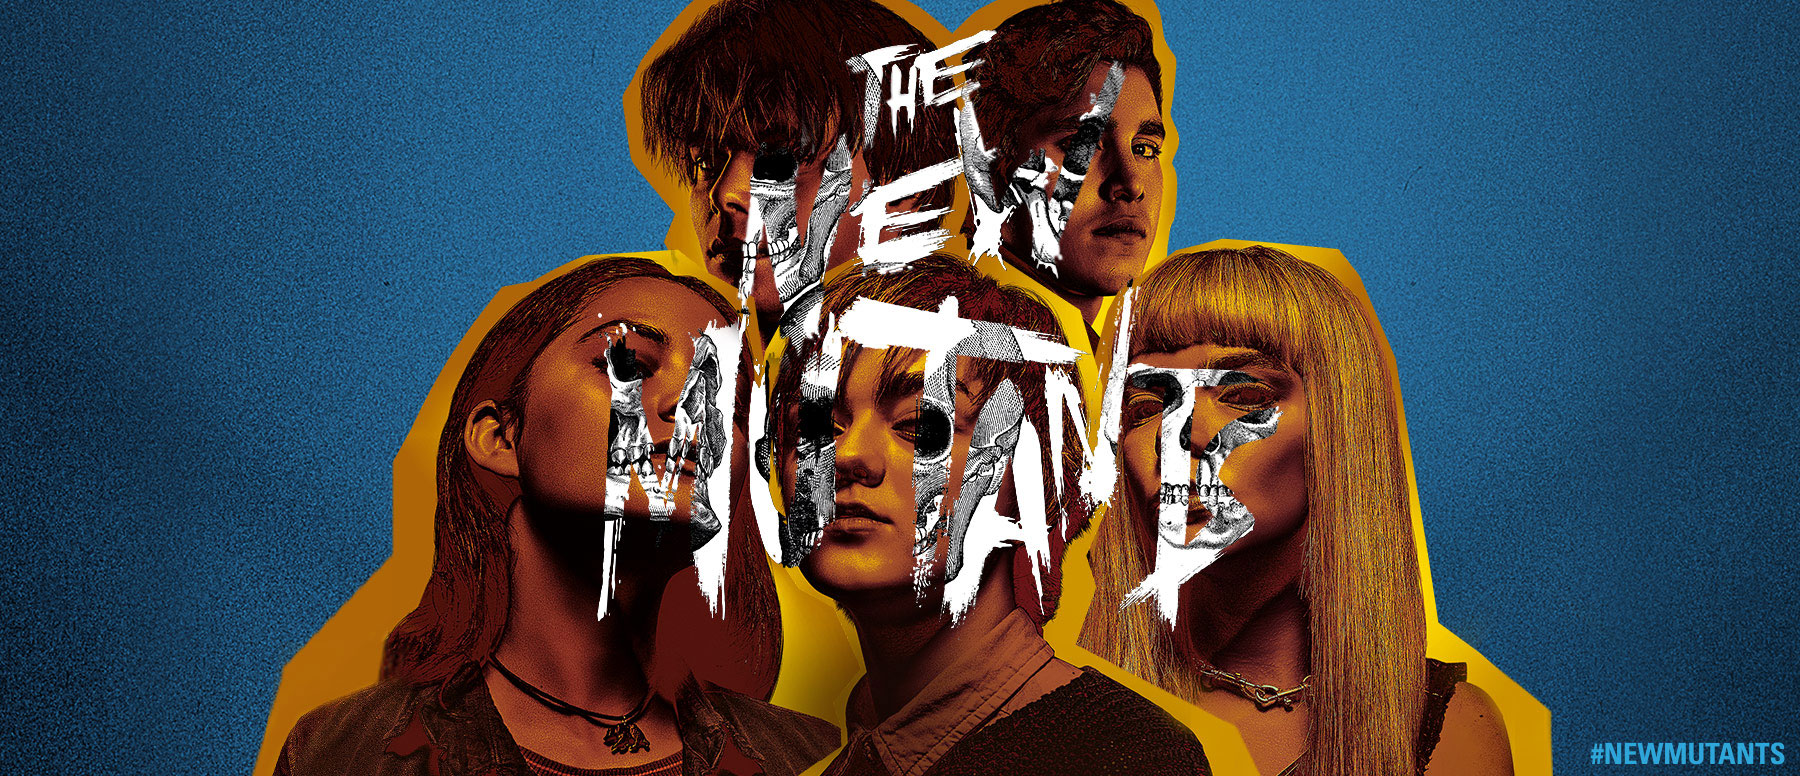 SDCC 2020: The Saga of The New Mutants, Features